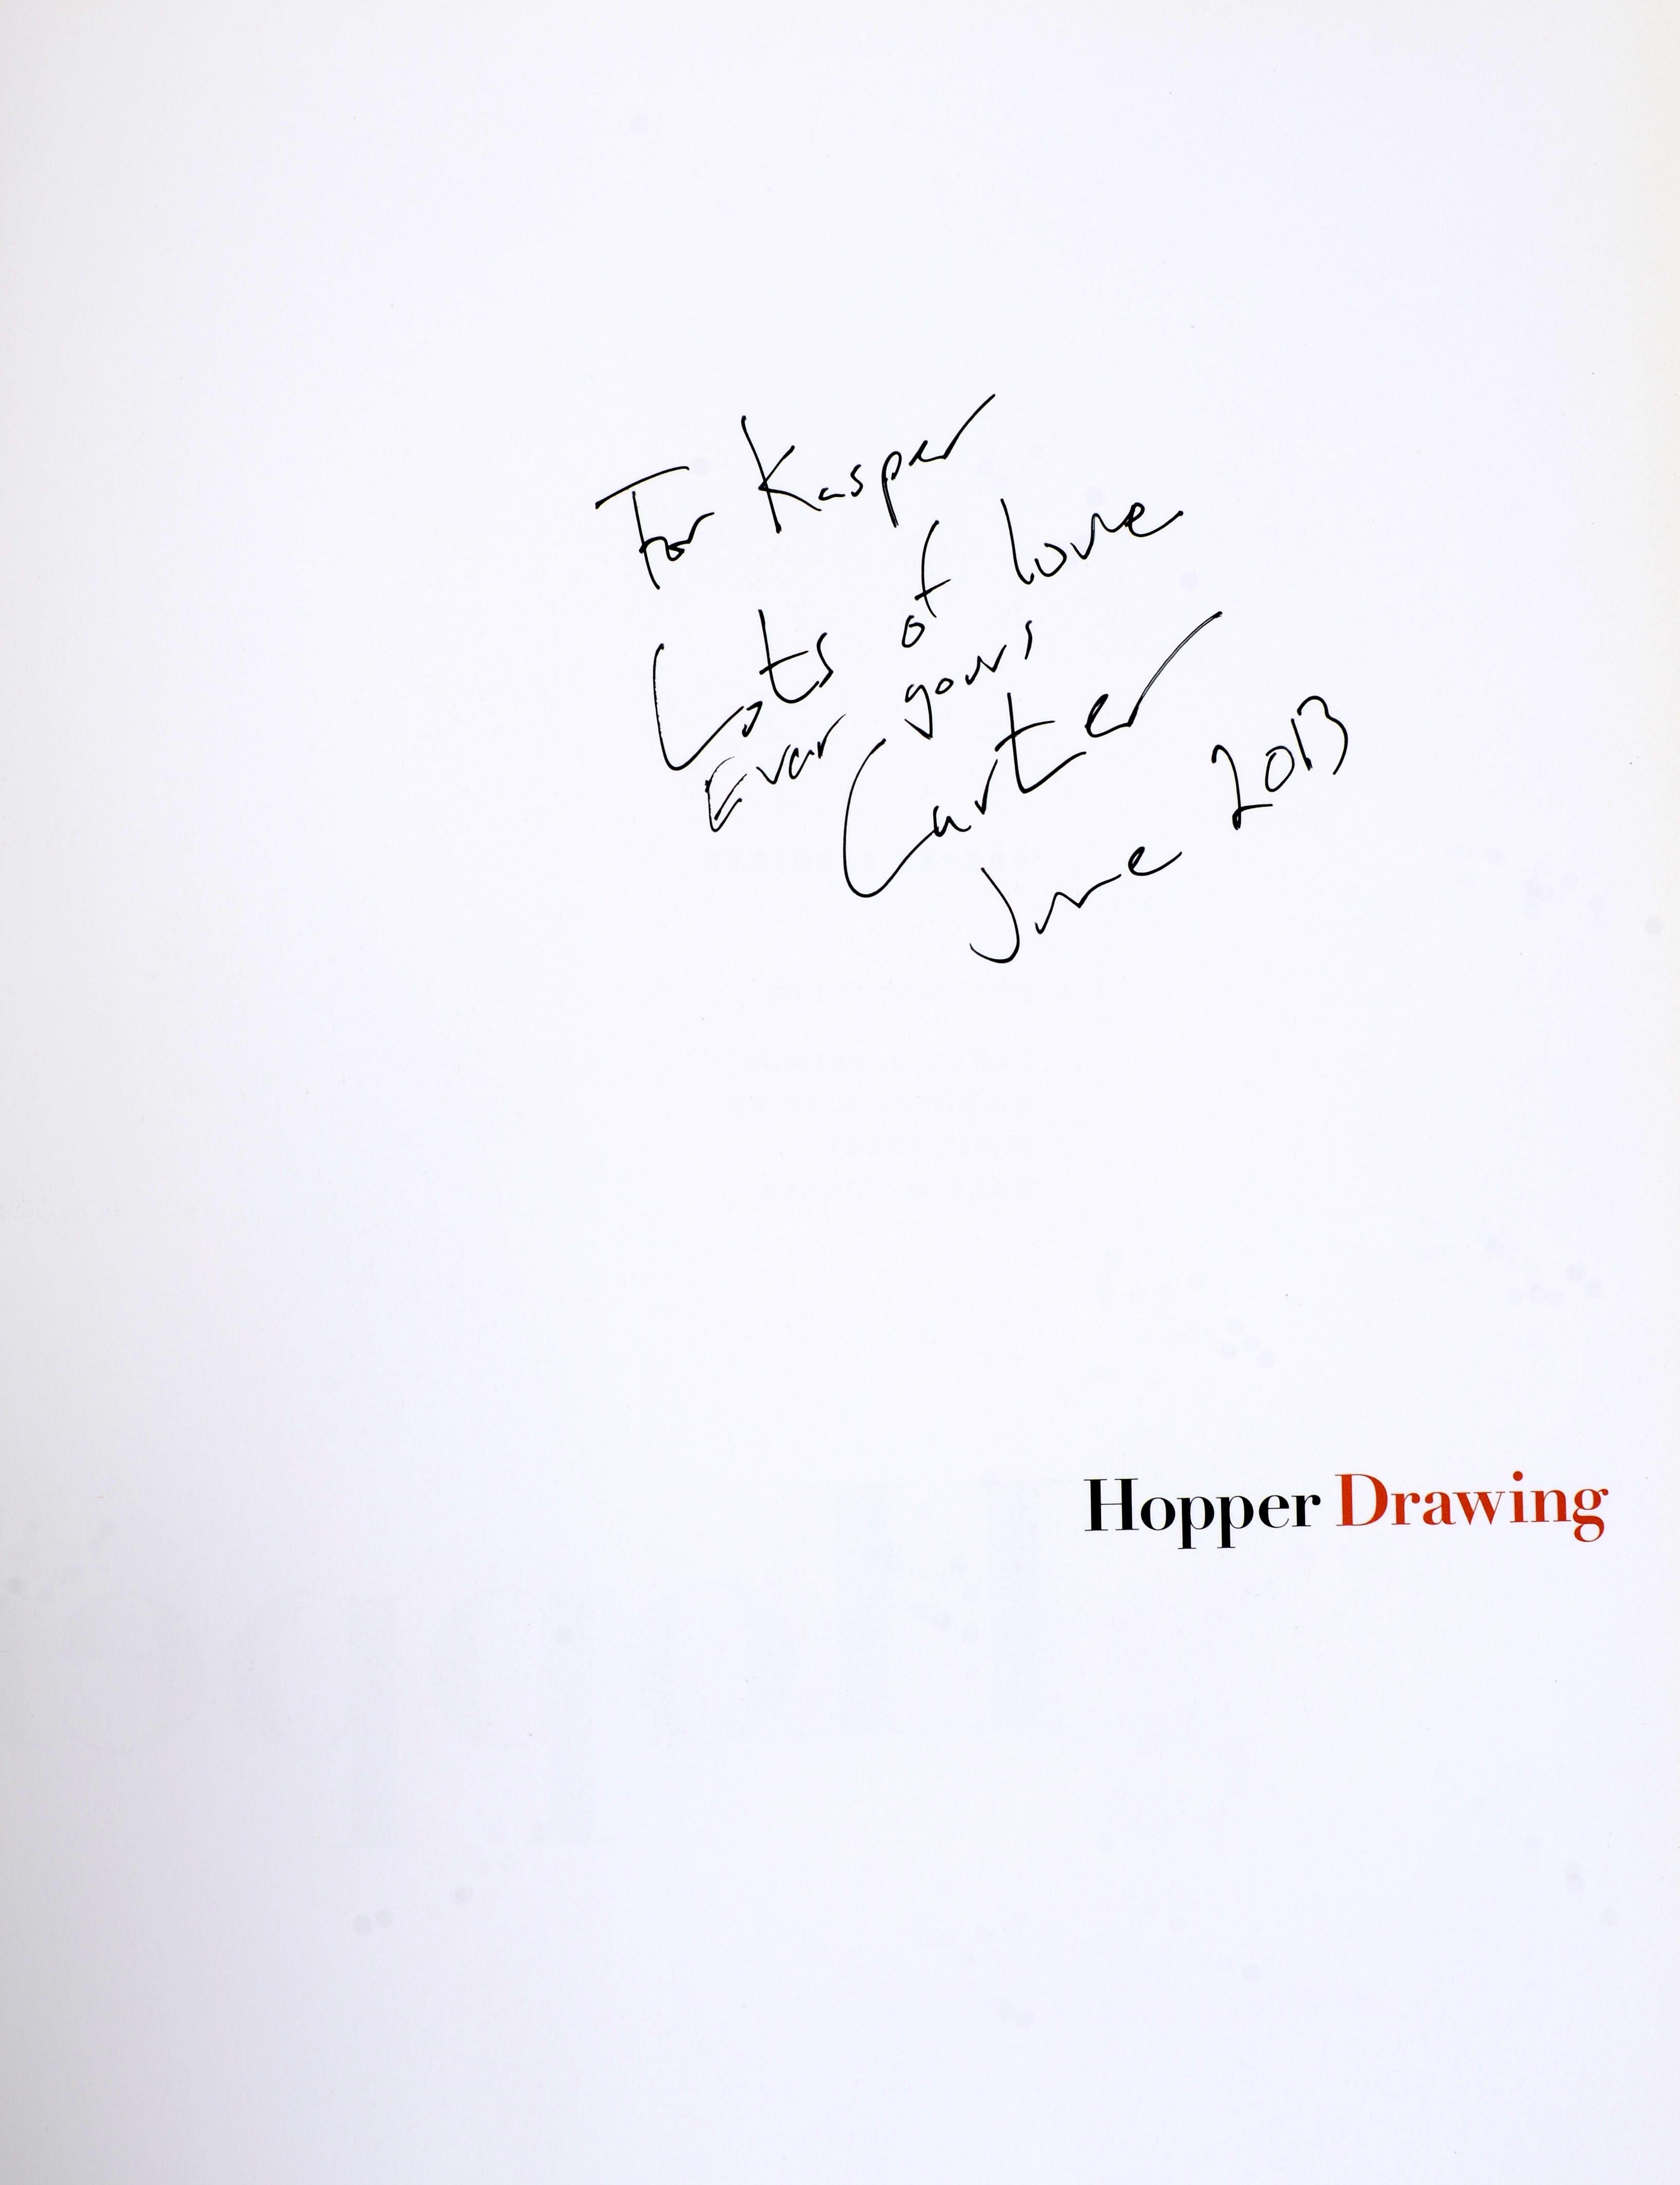 Hopper Drawing by Carter E Foster. 2013, Whitney Museum of American Art. 1st Ed hardcover with dust jacket. The book was owned by Herbert Kasper with label from J. P. Morgan with Kasper name on it. Herbert Kasper was an American fashion designer